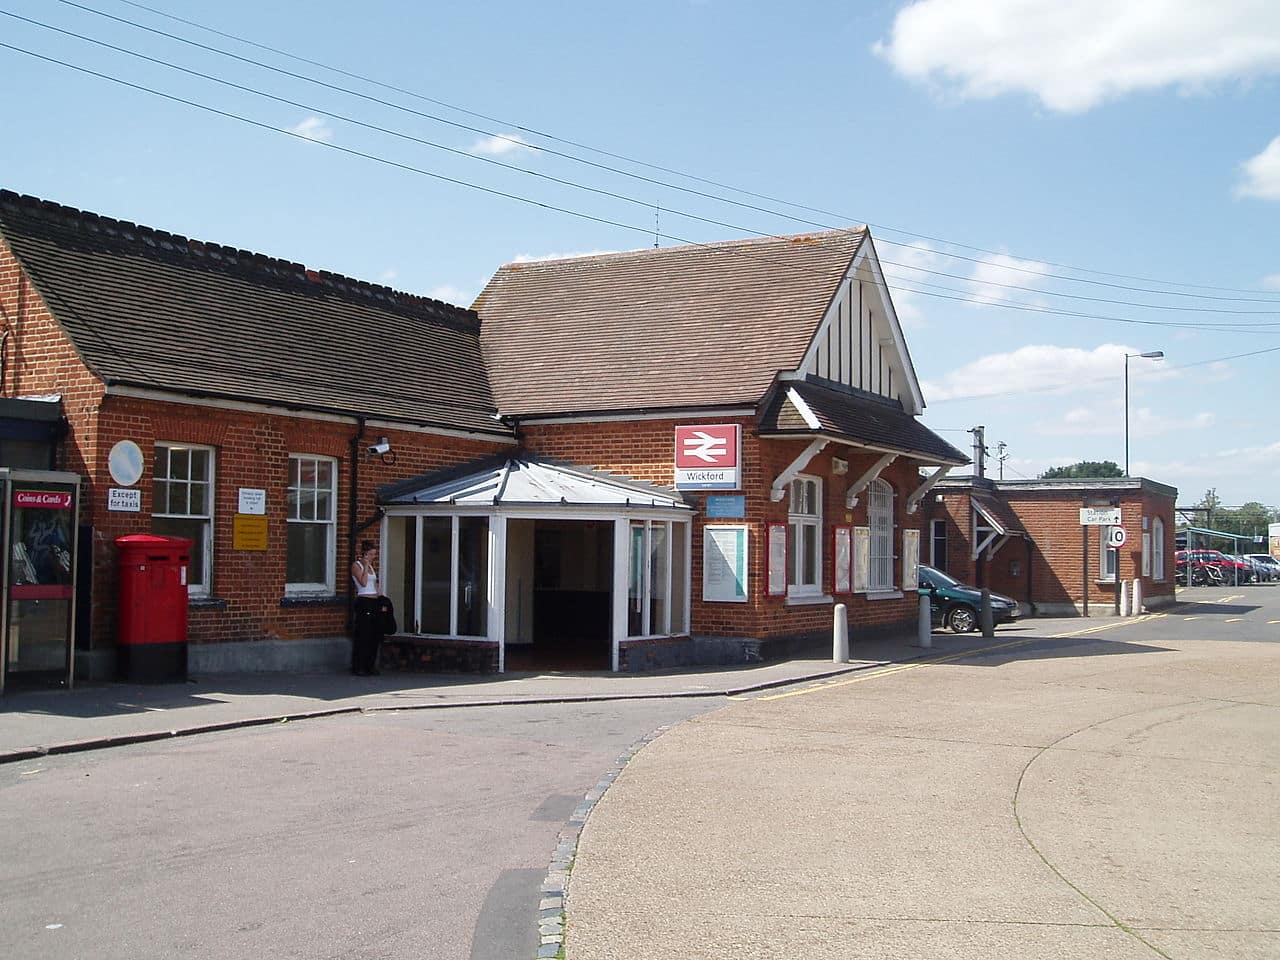 Wickford station plans to be demolished